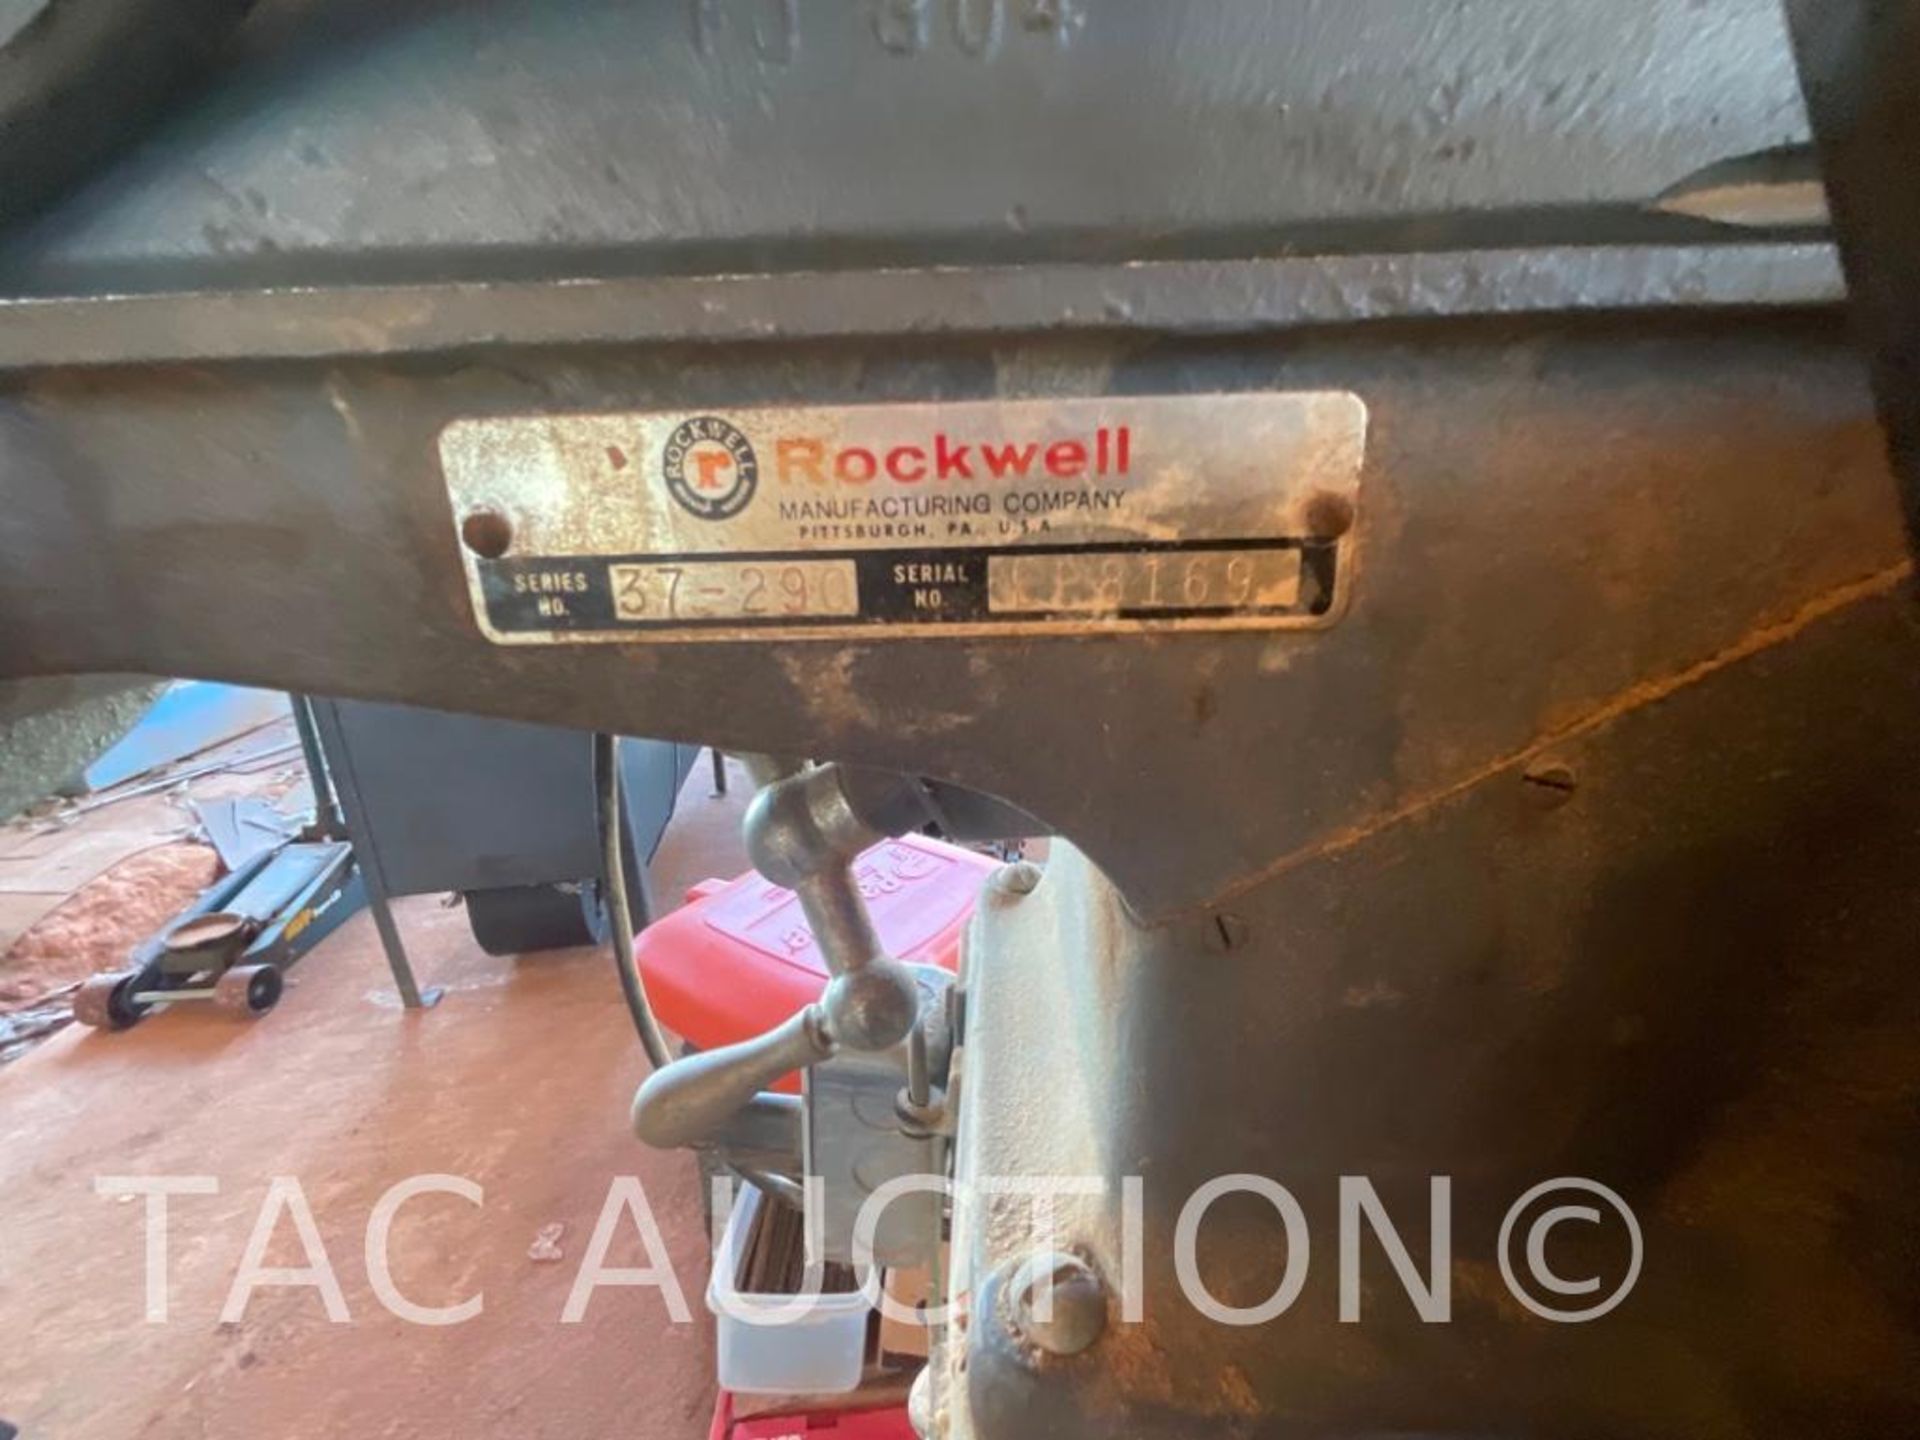 Rockwell 37-290 Wood Jointer - Image 4 of 6